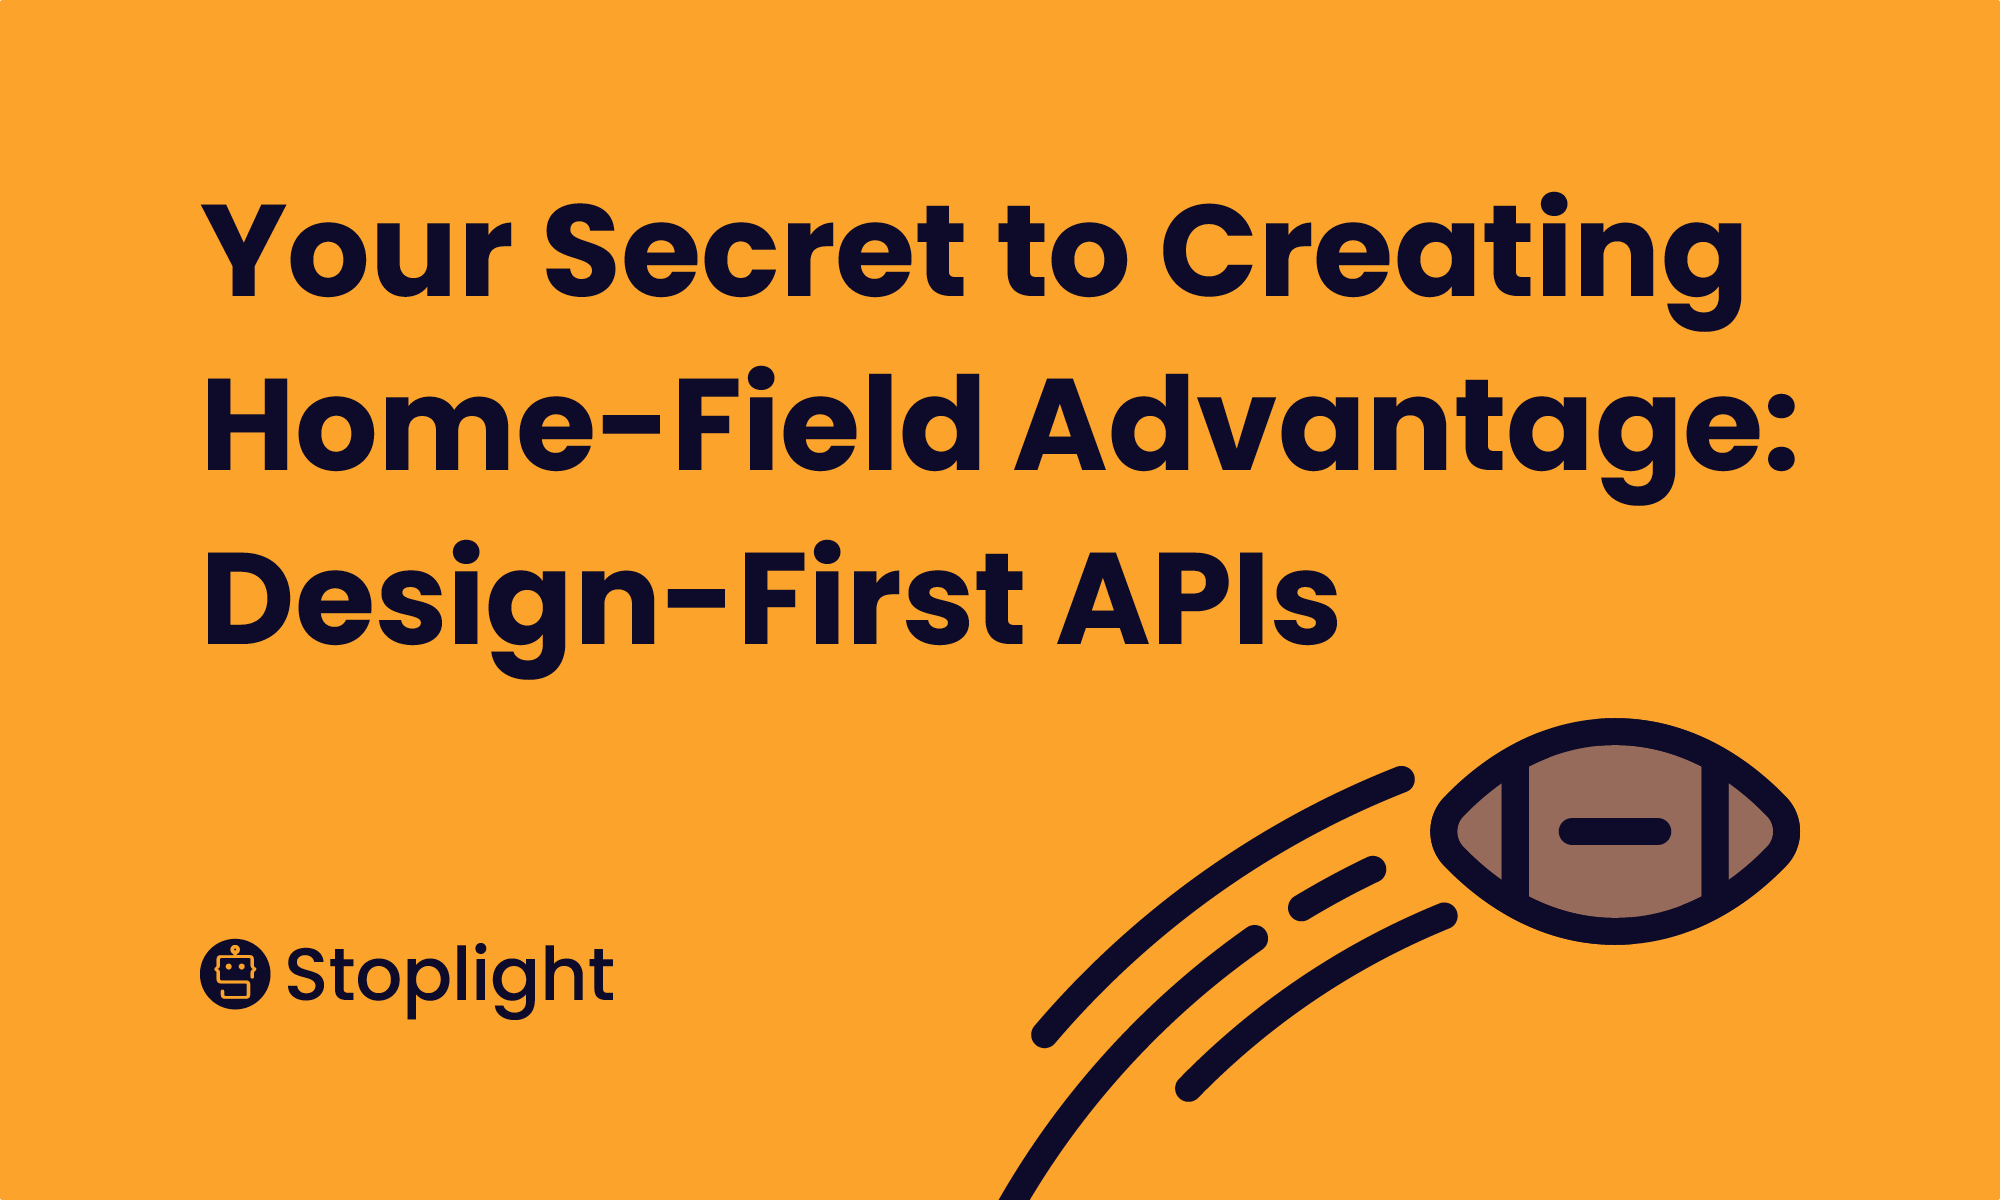 Your Secret to Creating Home-Field Advantage: Design-First APIs